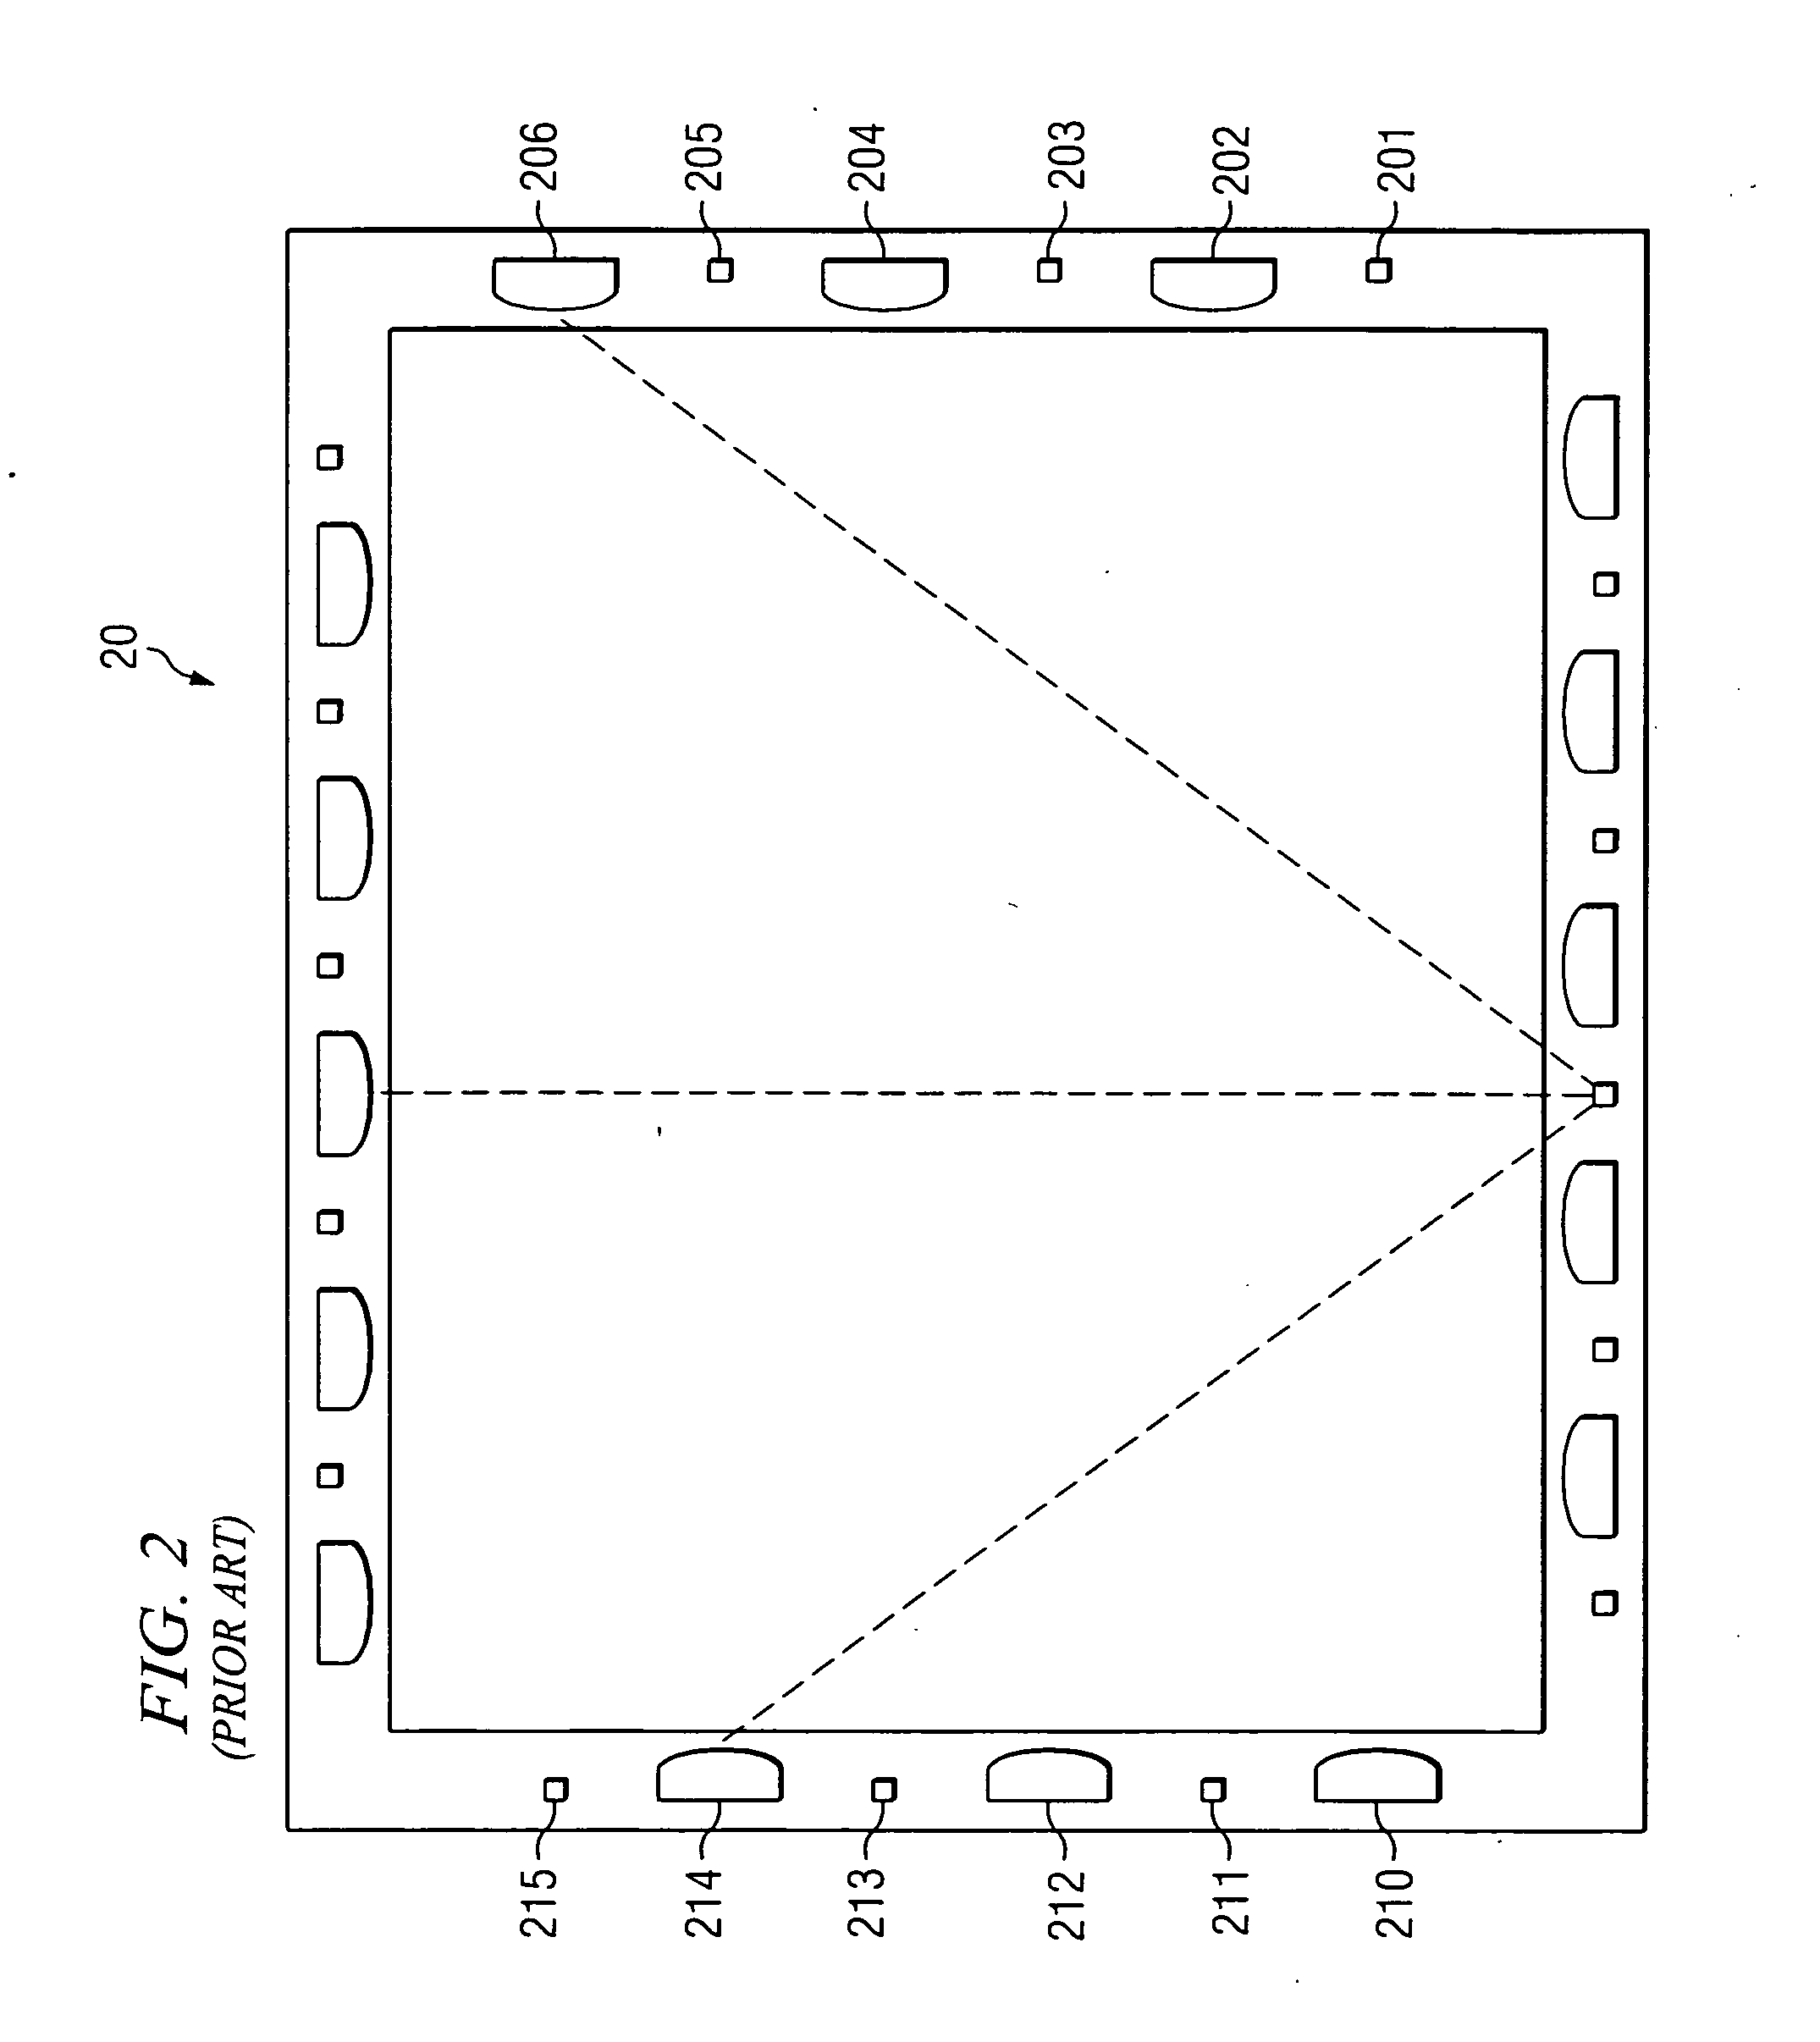 Systems and methods for high resolution optical touch position systems